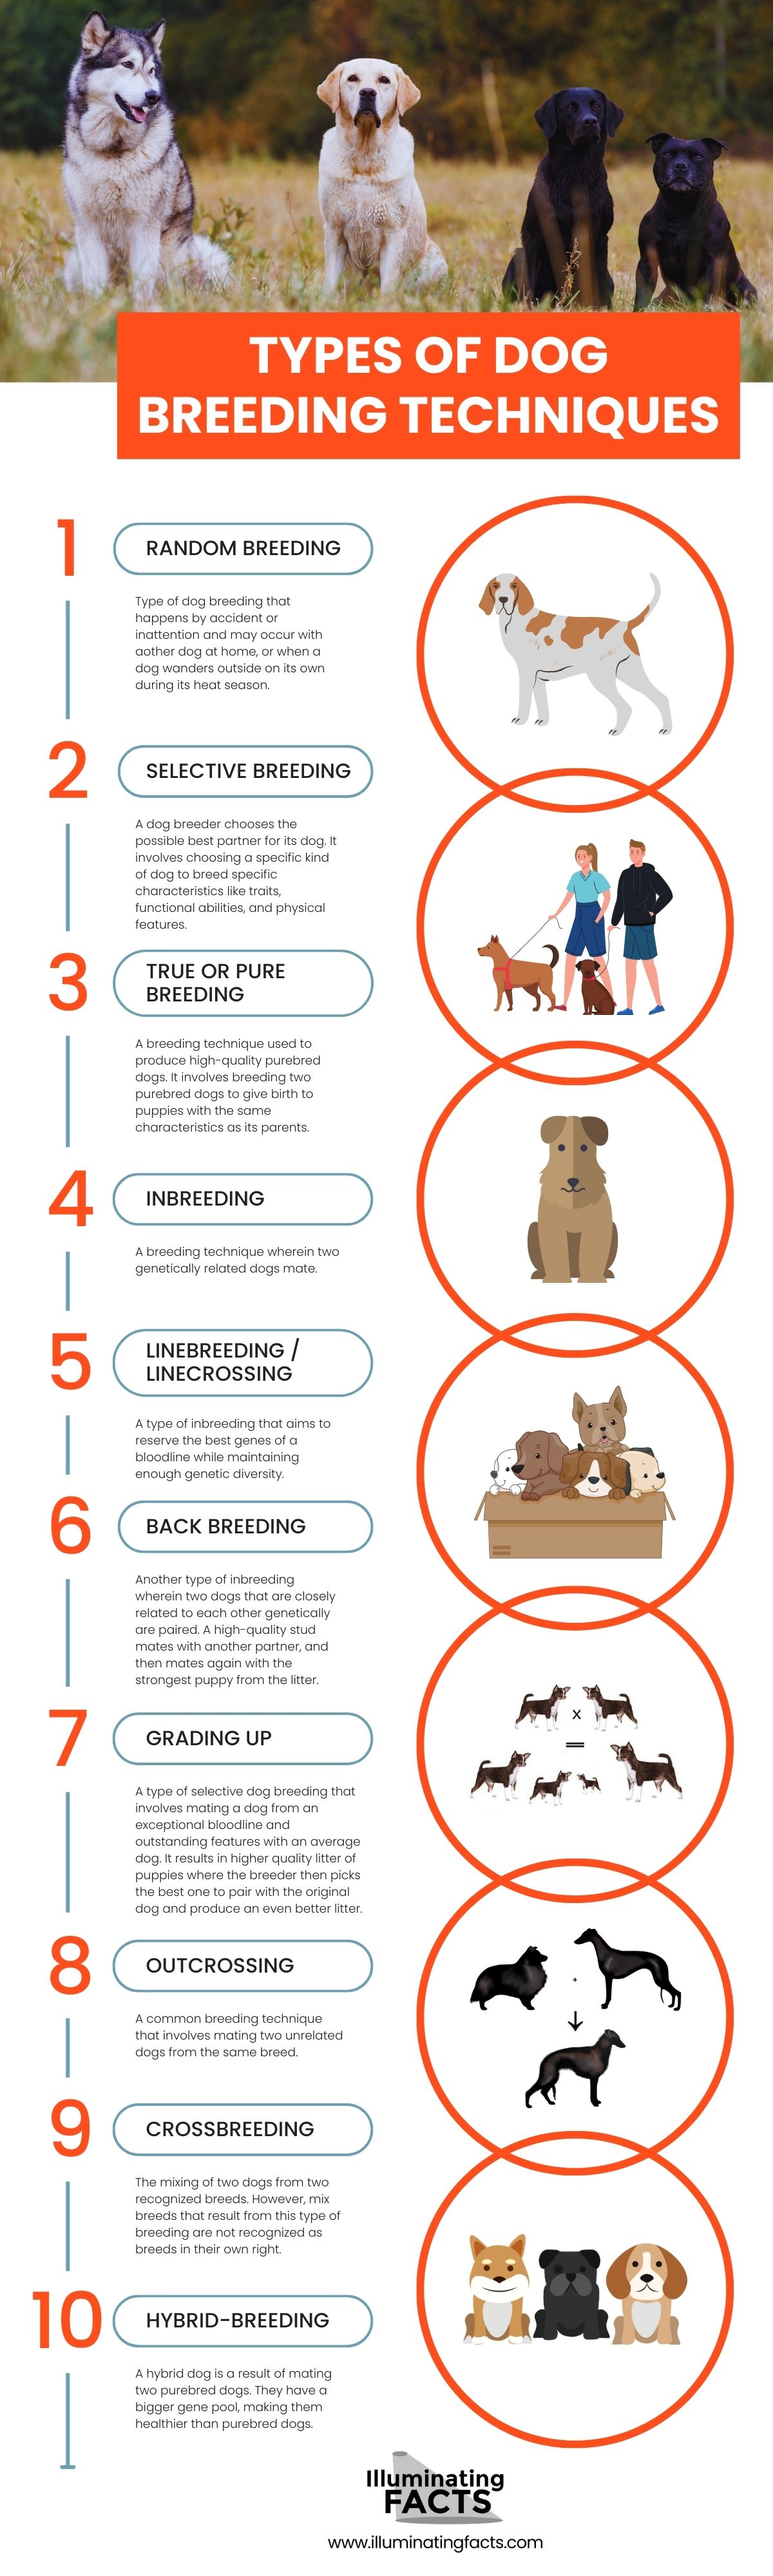 Types of Dog Breeding Techniques